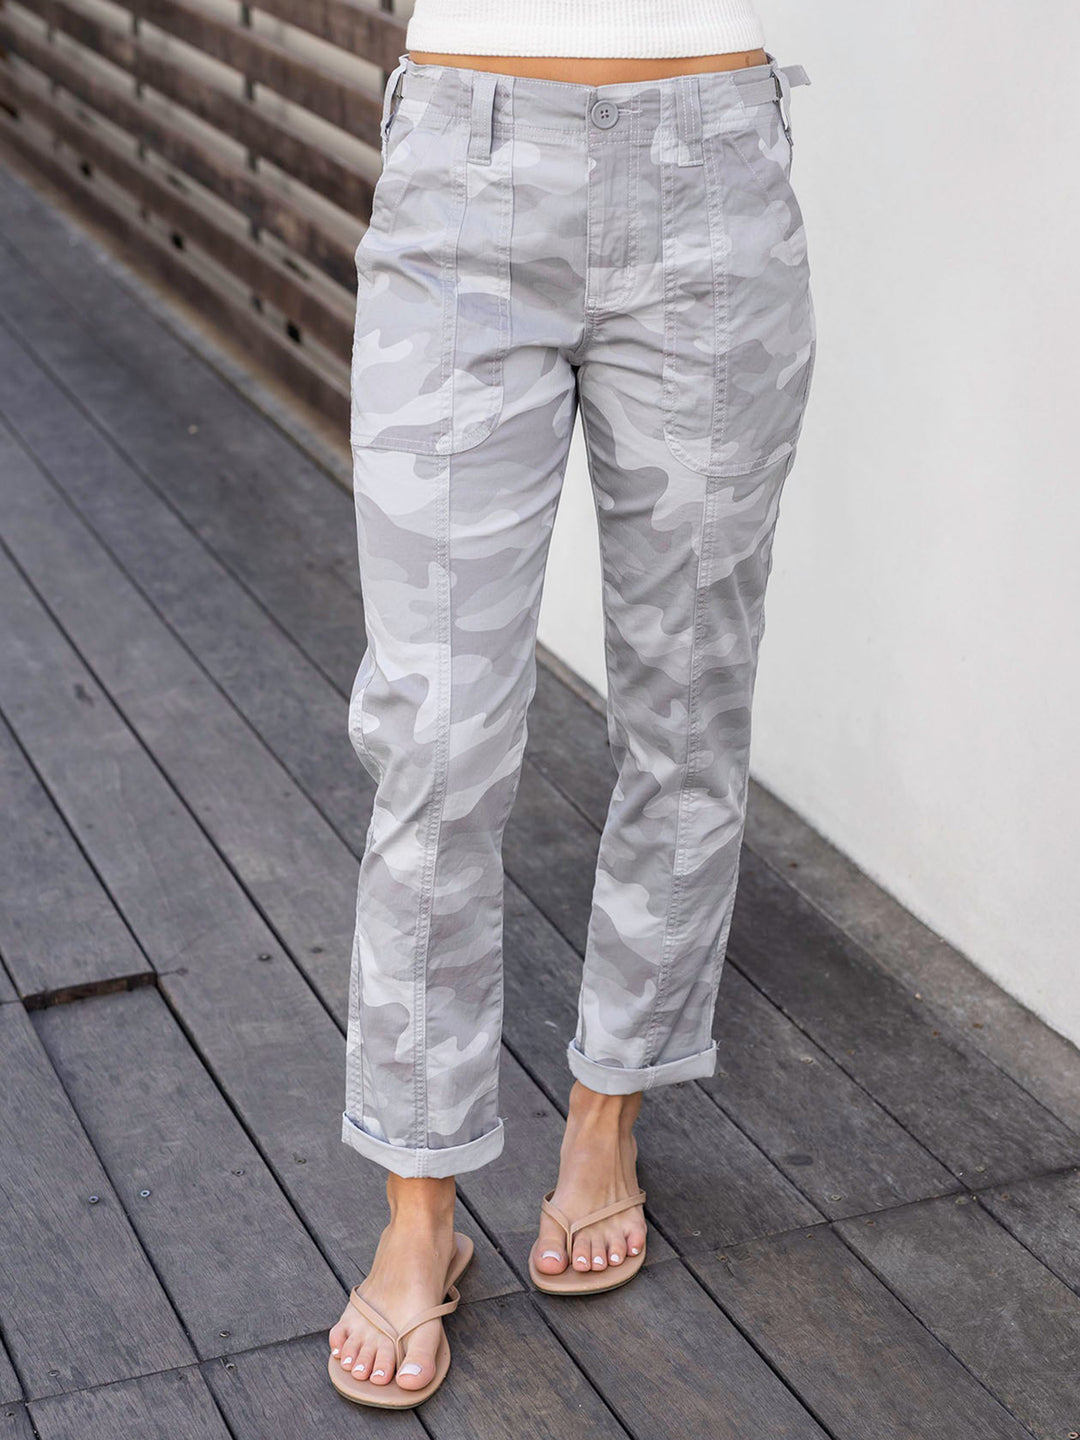 Camper Cargo Pants in Camo by Grace & Lace